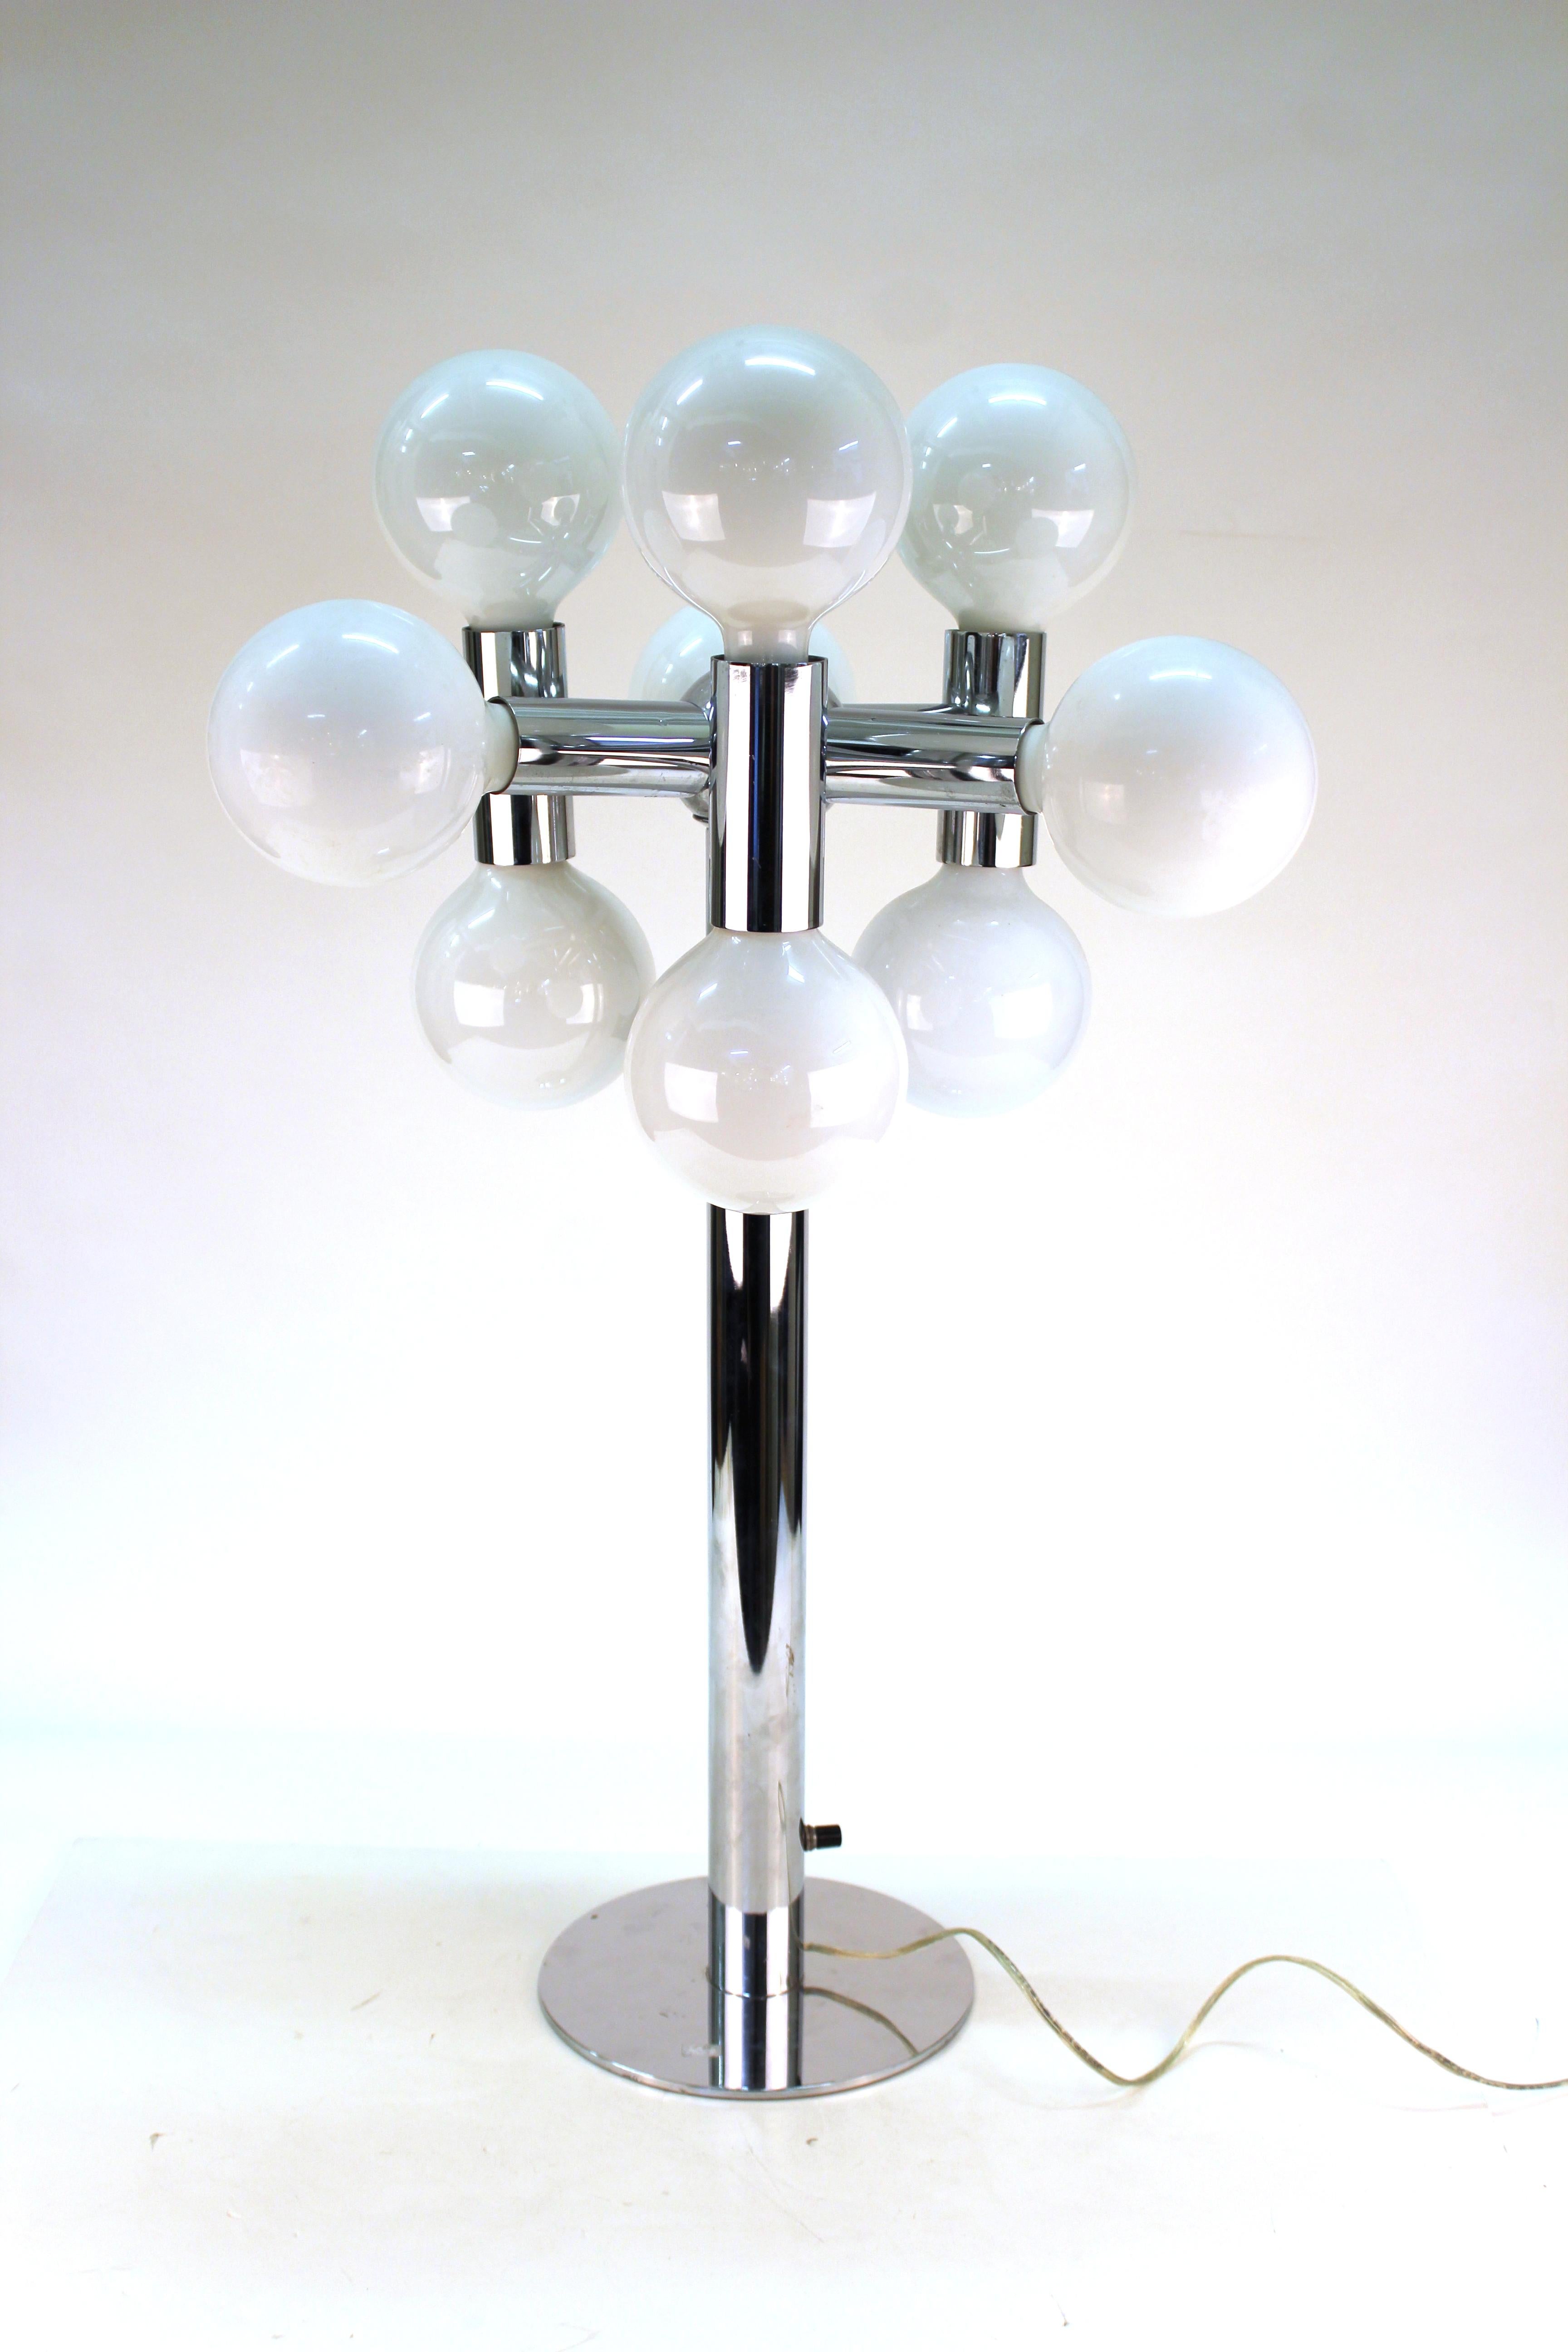 Molecular polished chrome table lamp made by Robert Sonneman in the 1970s. The piece has nine large bulb lights disposed in molecular style around a central base shaft. The piece is in great vintage condition, with some minor age appropriate wear to